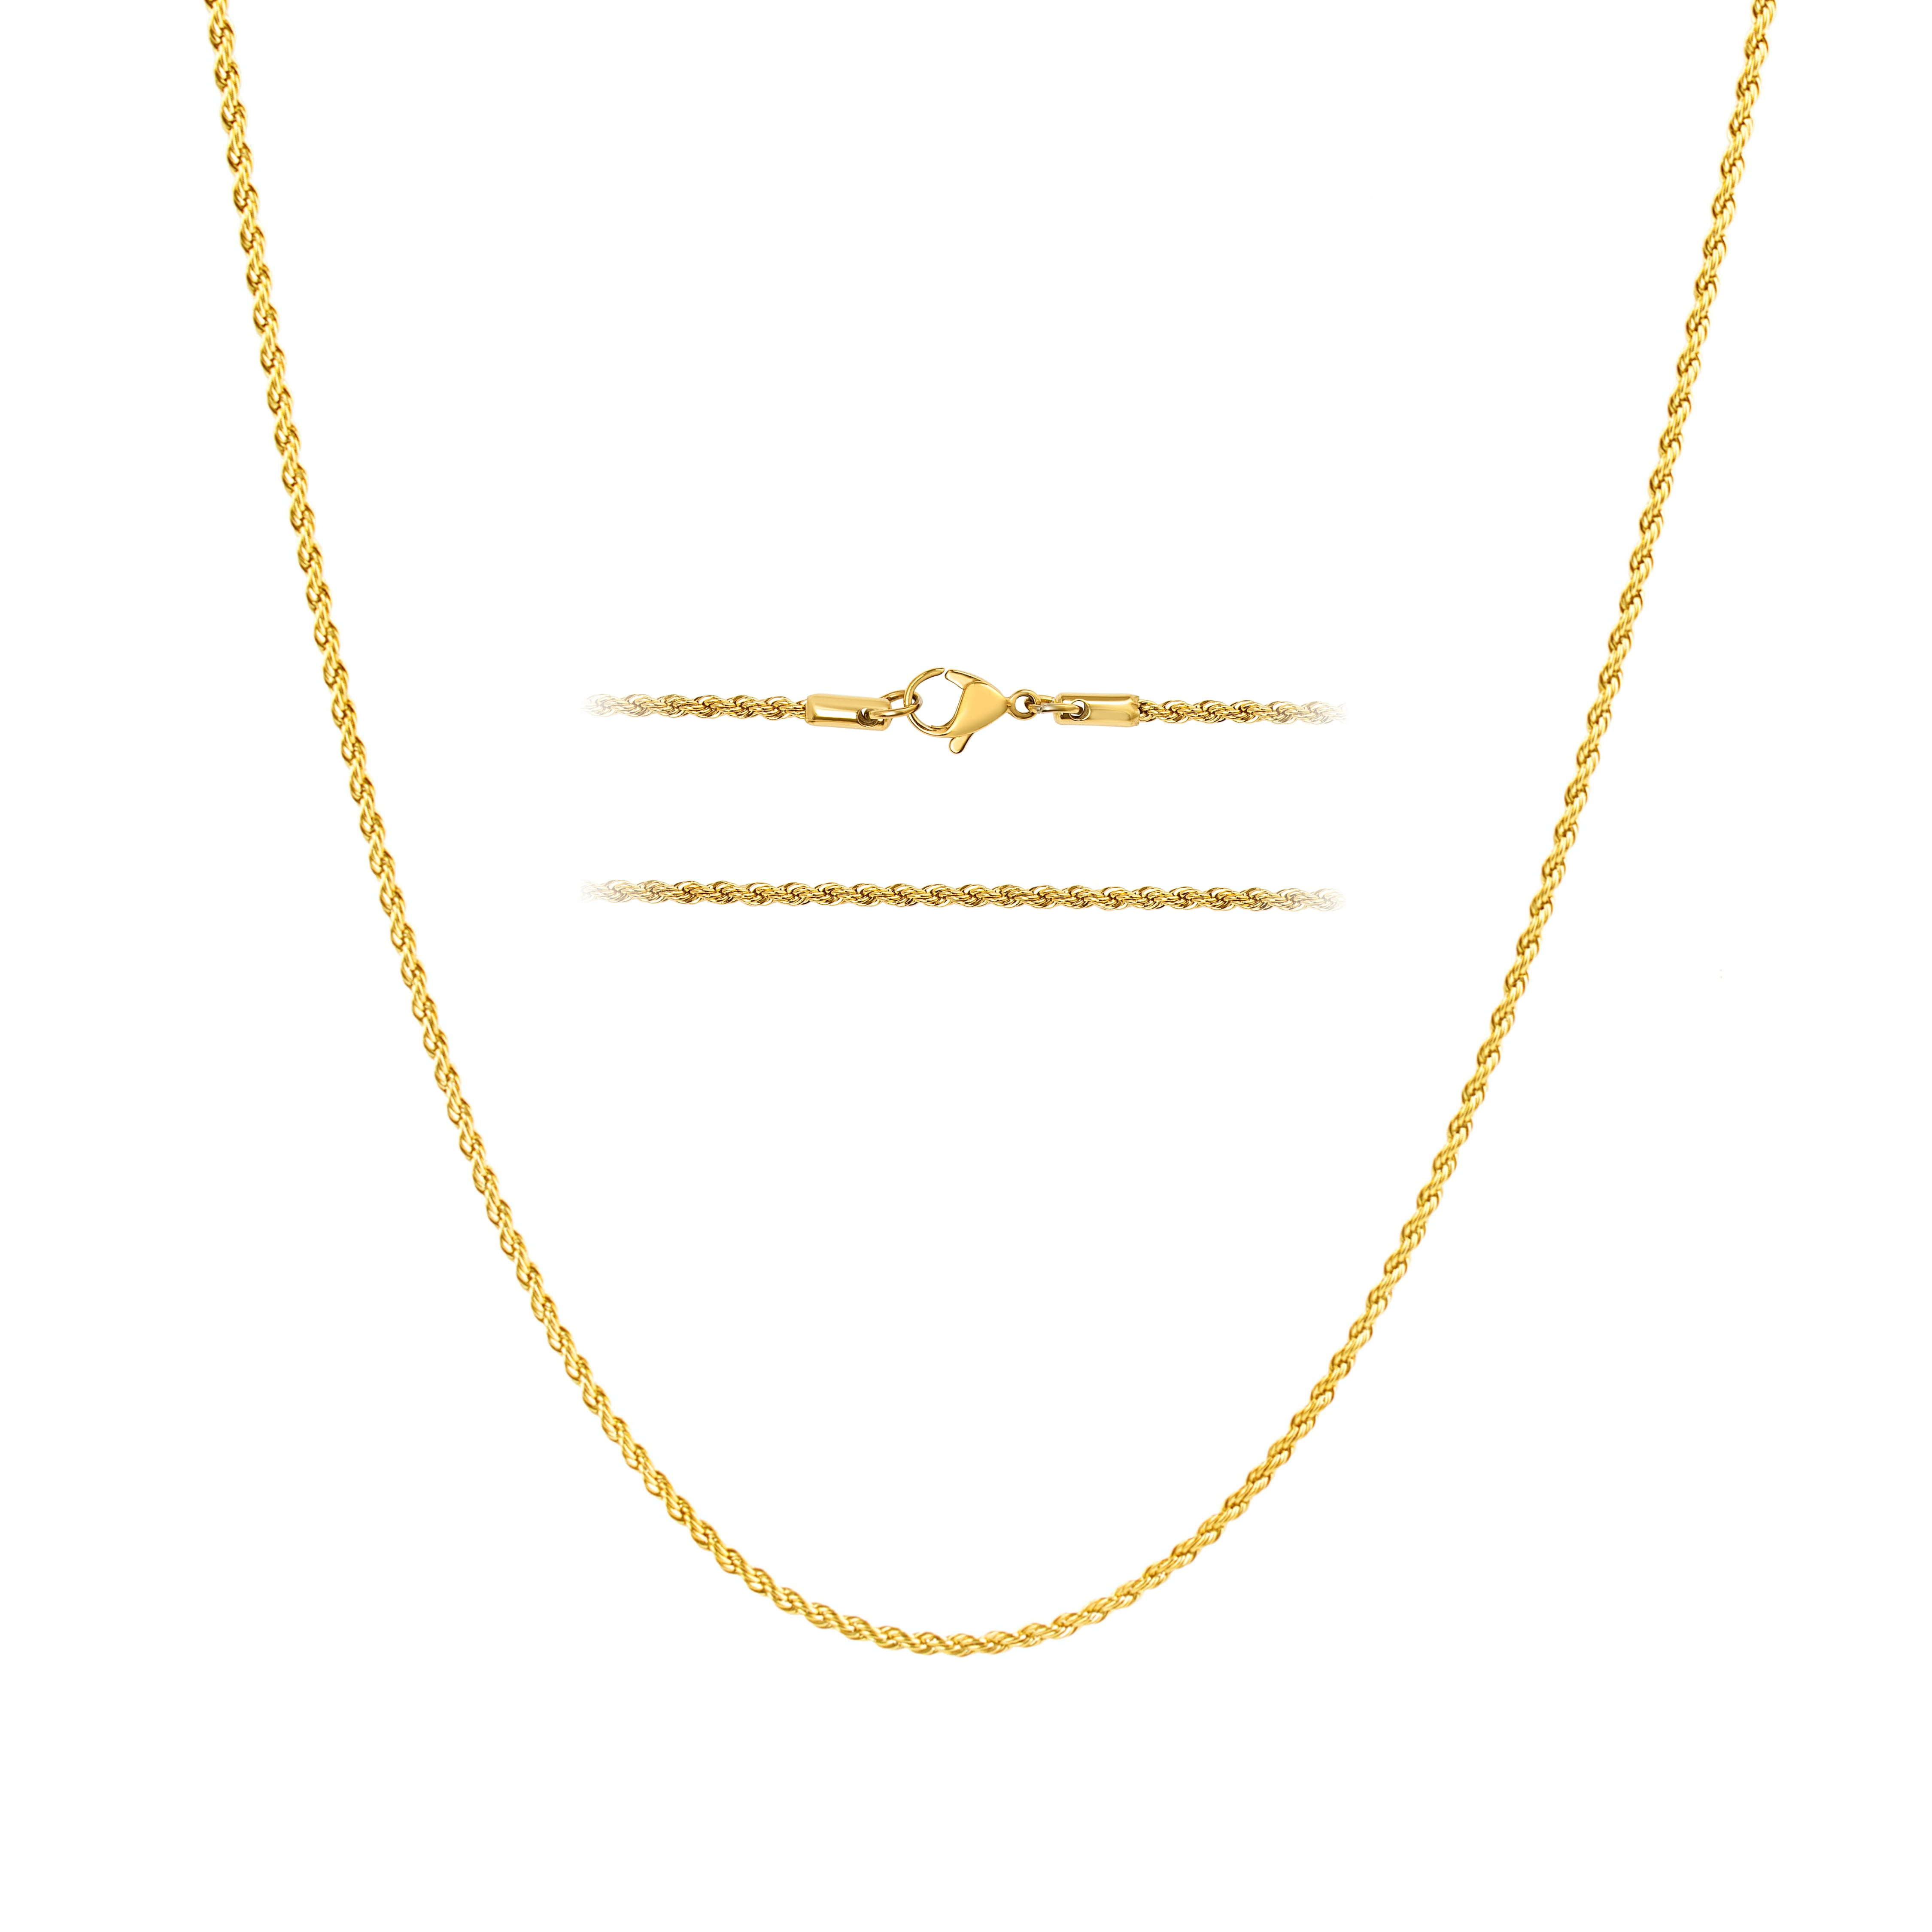 KISPER 18k Gold Over Stainless Steel 2mm Thin Hip Hop Rope Chain